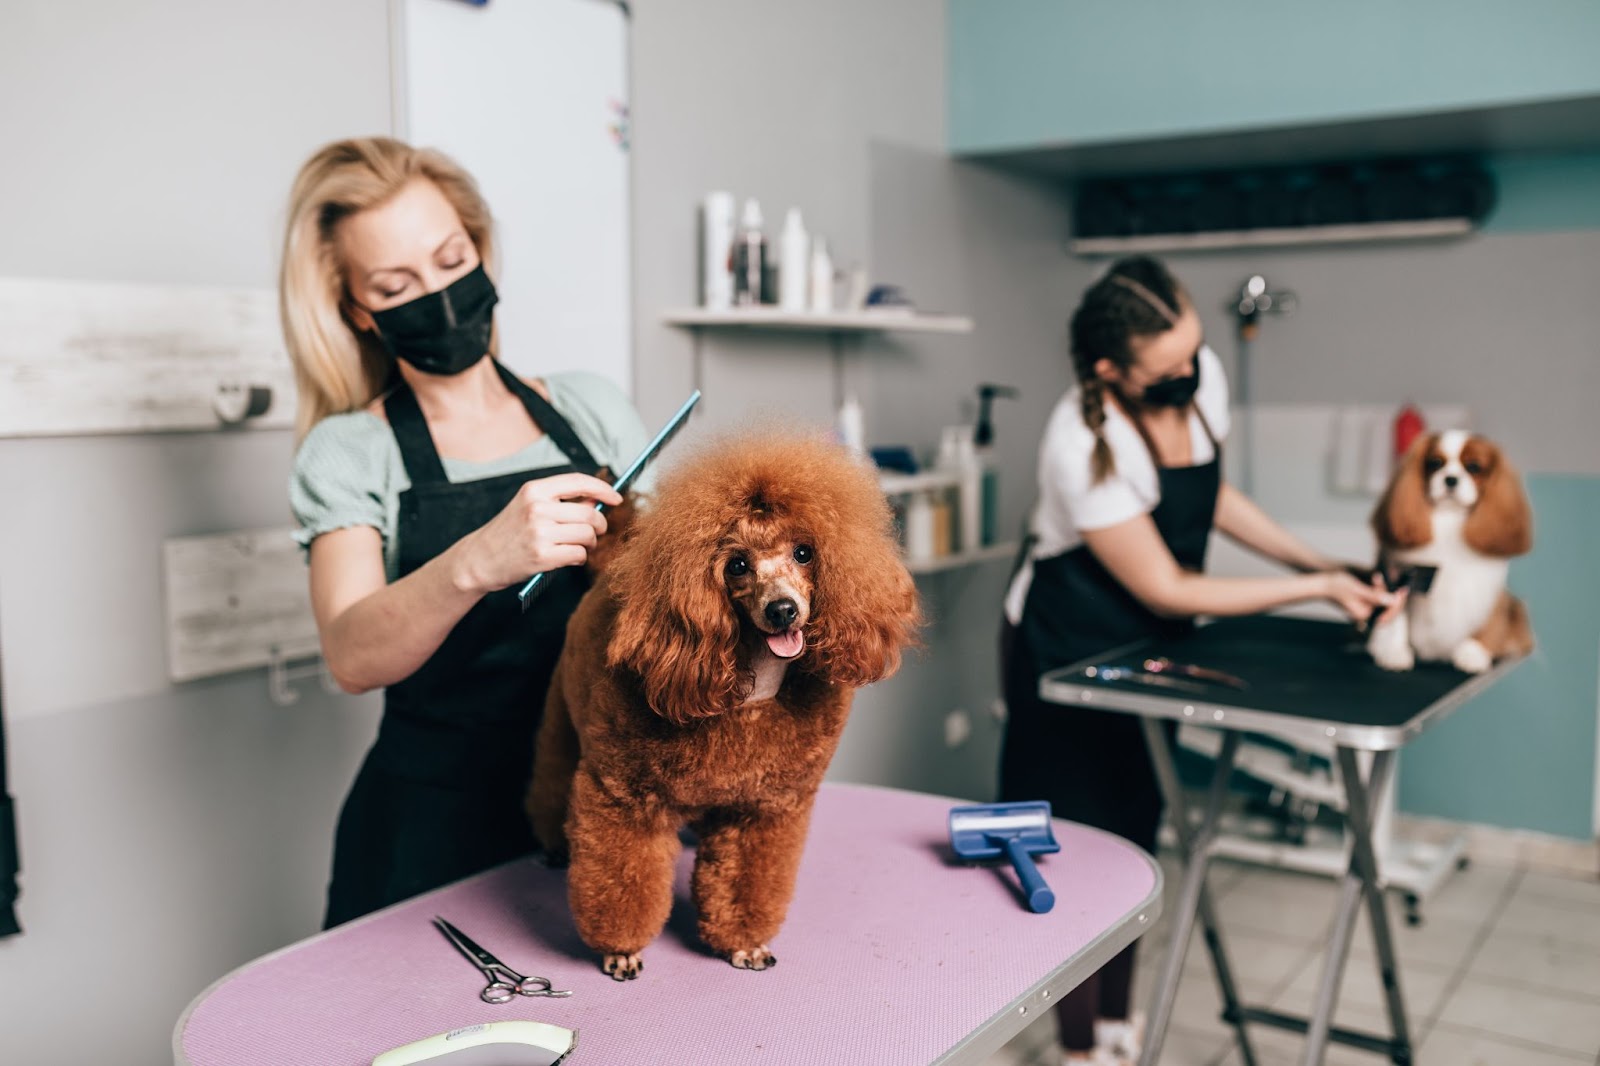 Hairy dog getting trimmed by a groomer